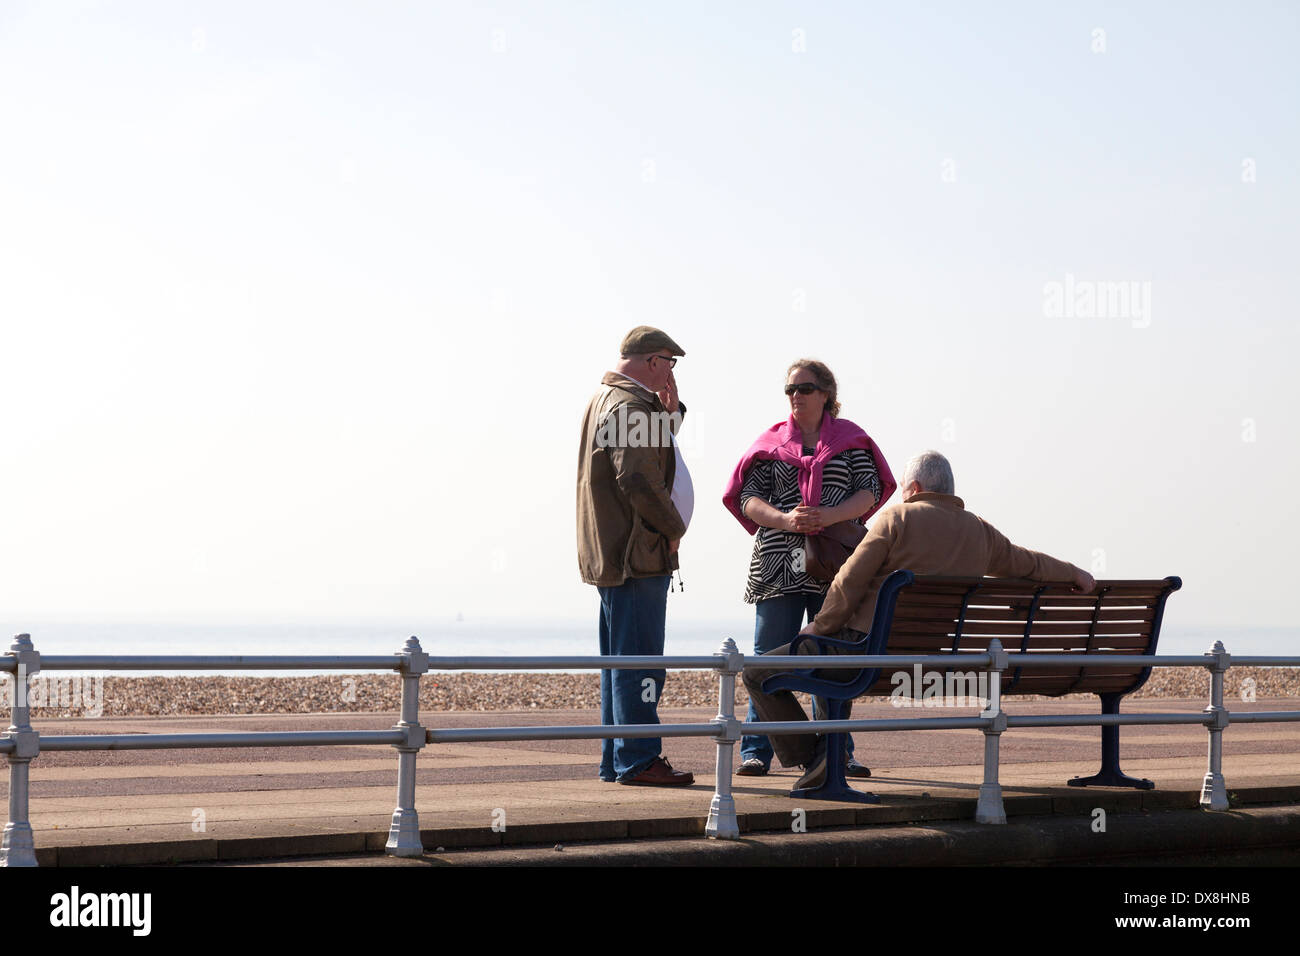 Middle aged group of three friends around bench on promenade. Stock Photo